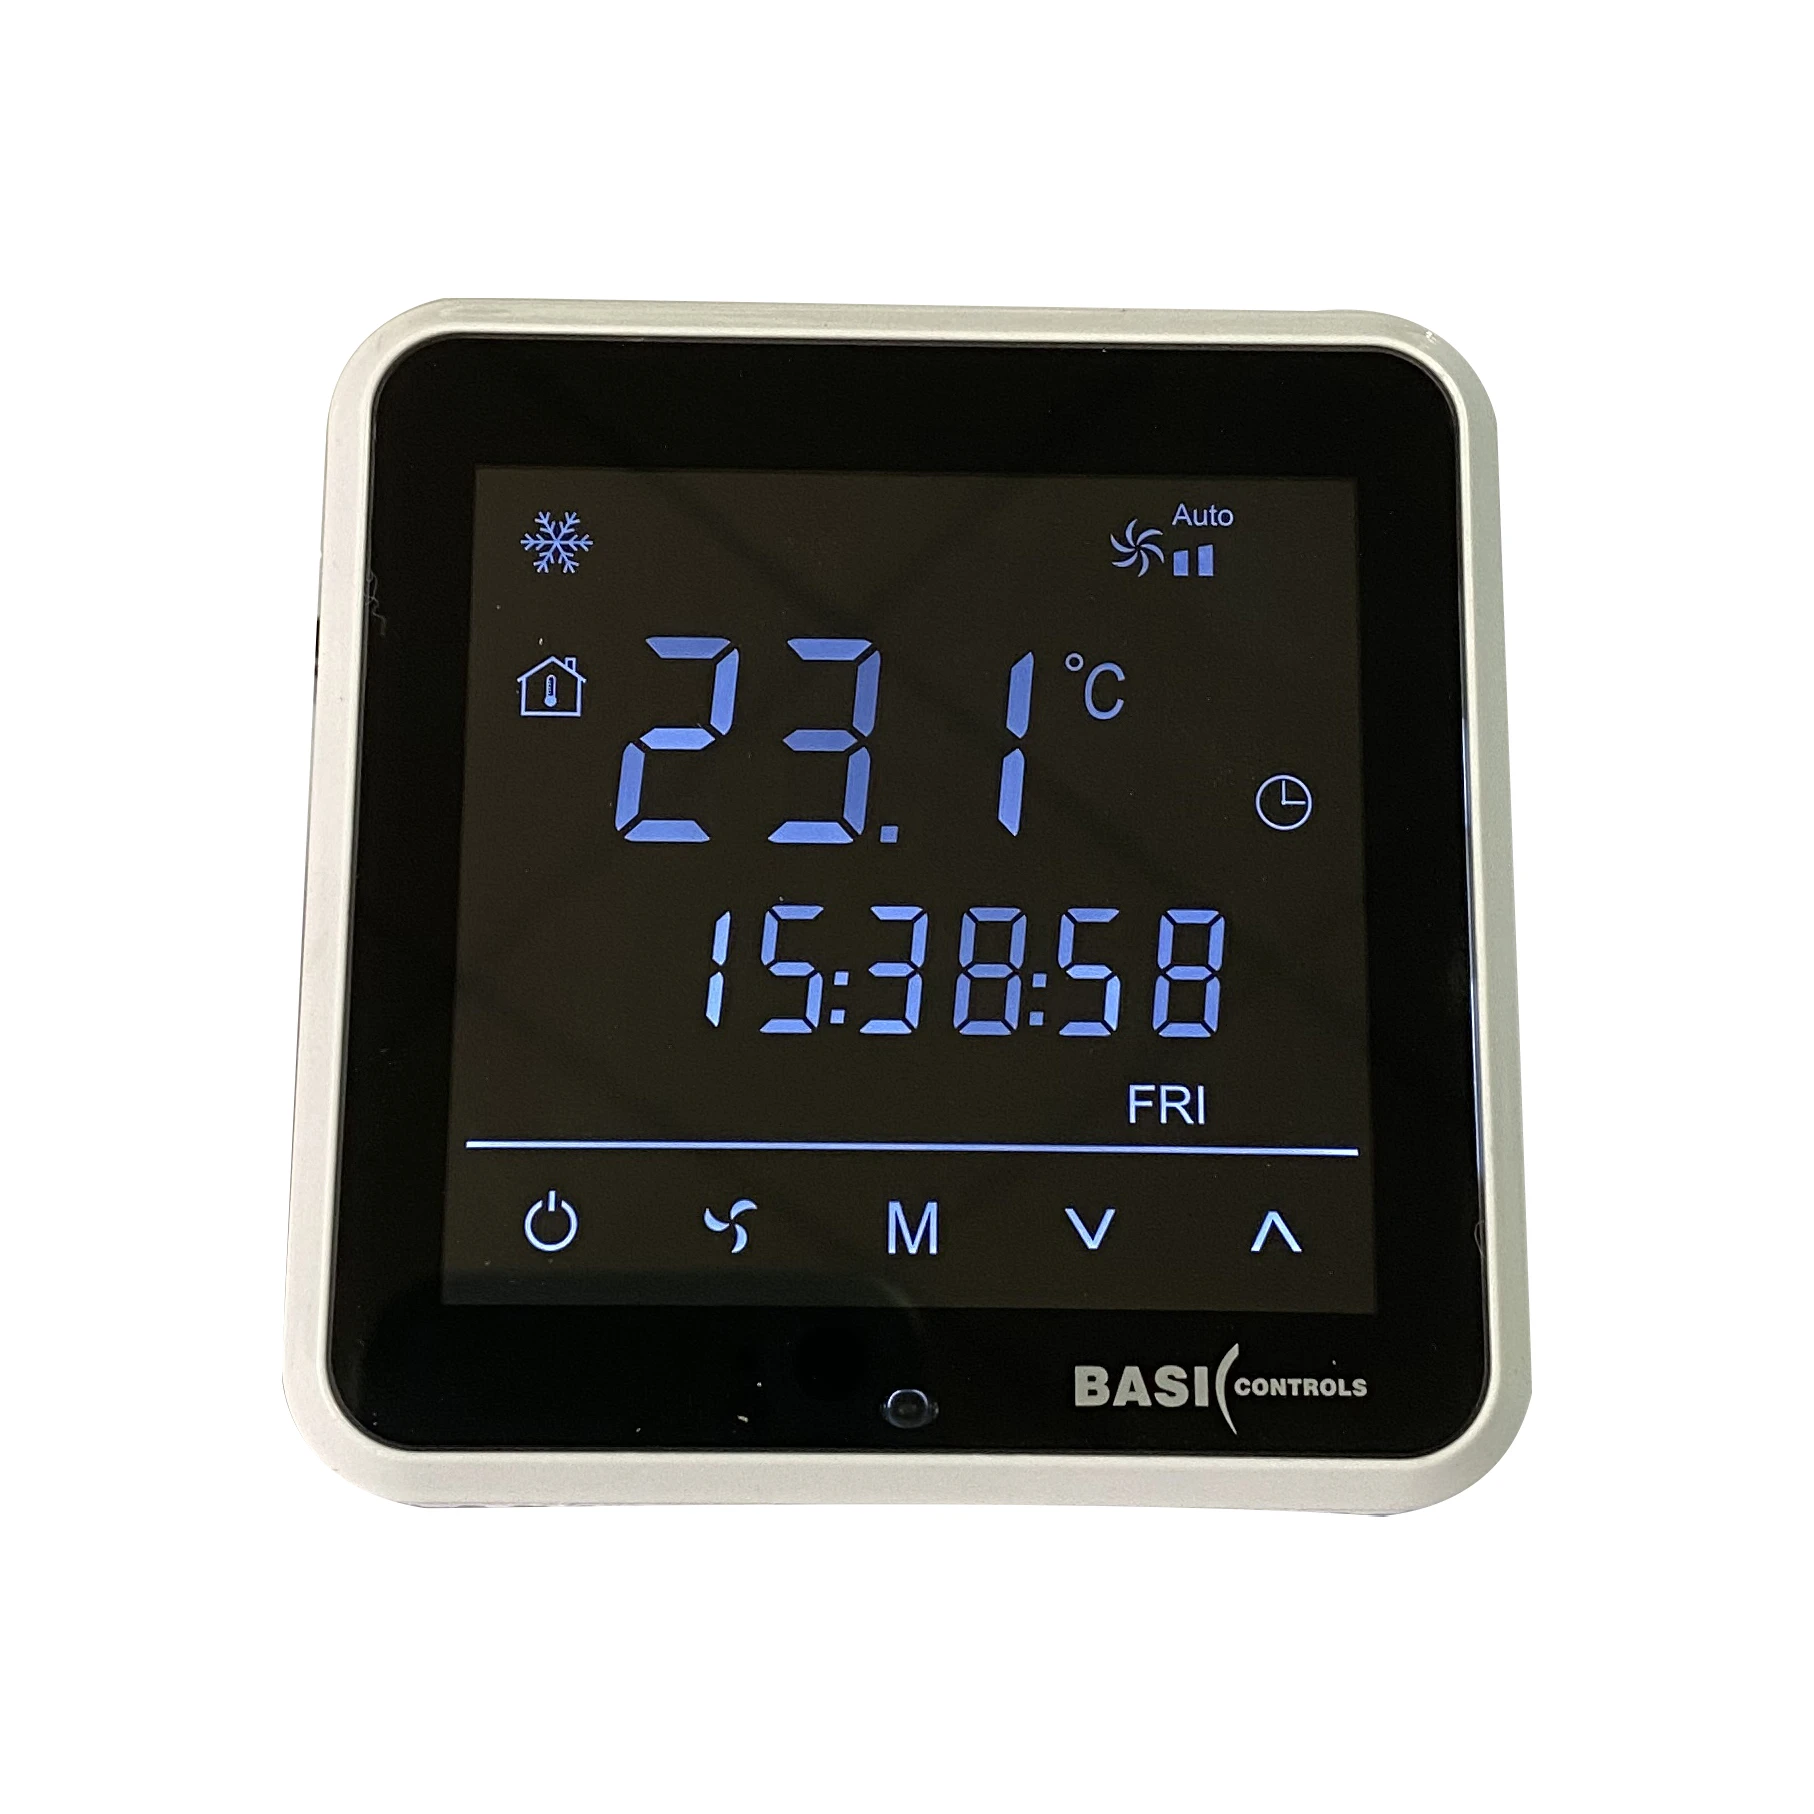 BASIC CONTROLS  temperature instruments laboratory thermostat devices thermostat control